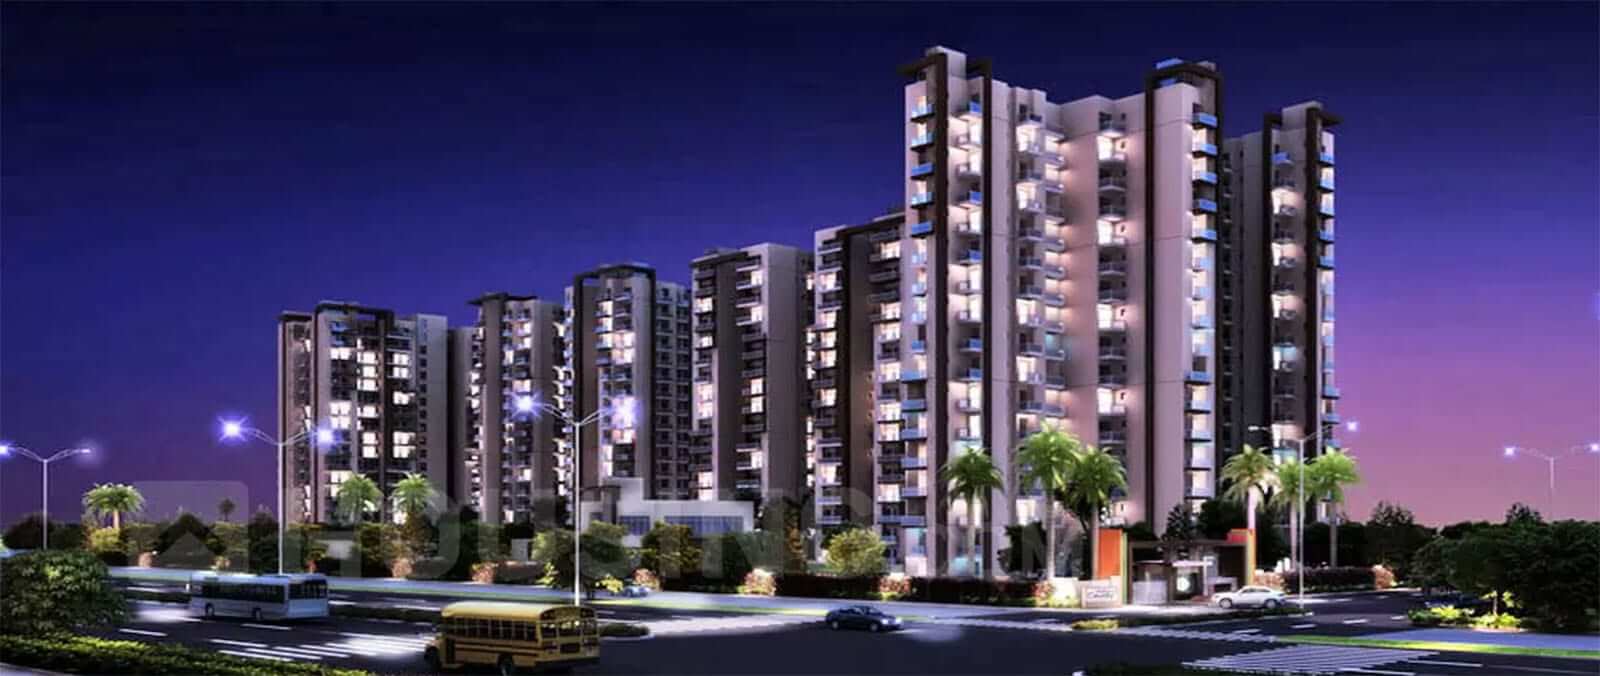 Best Flats at resonable rates in Faridabad